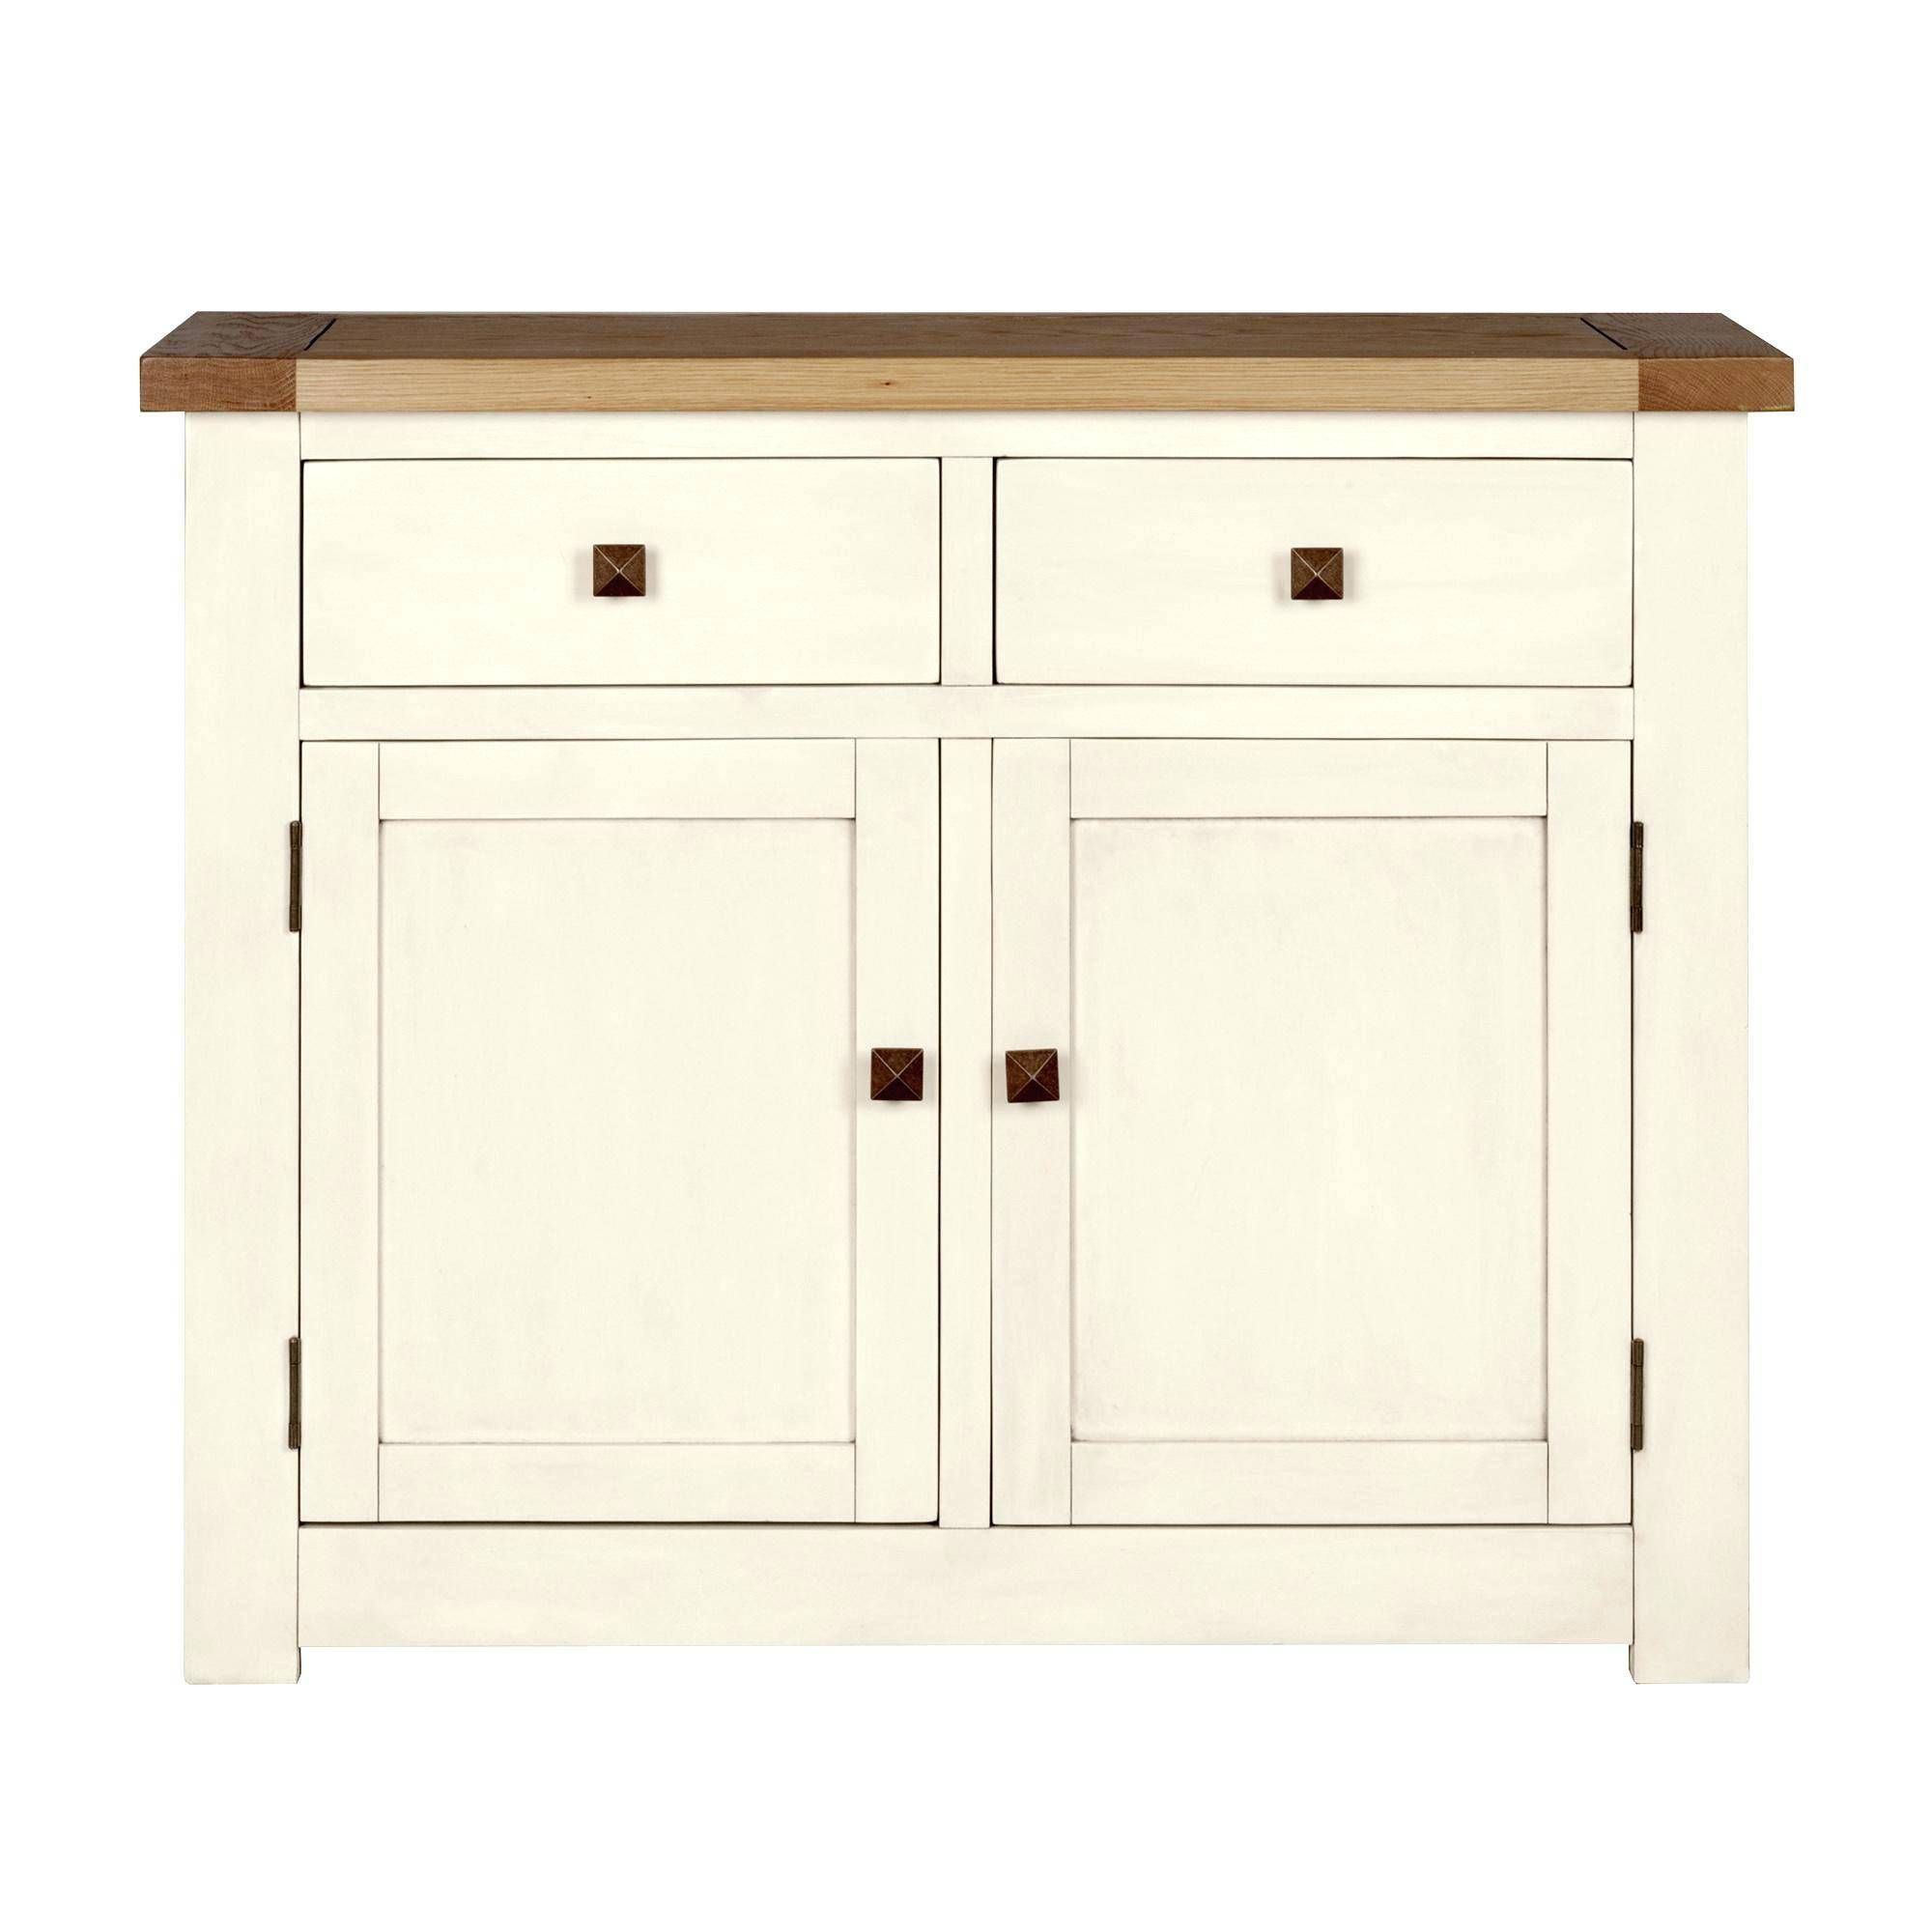 Cream Sideboards Cream Sideboard Sideboards Cream And Oak – Soops (View 8 of 15)